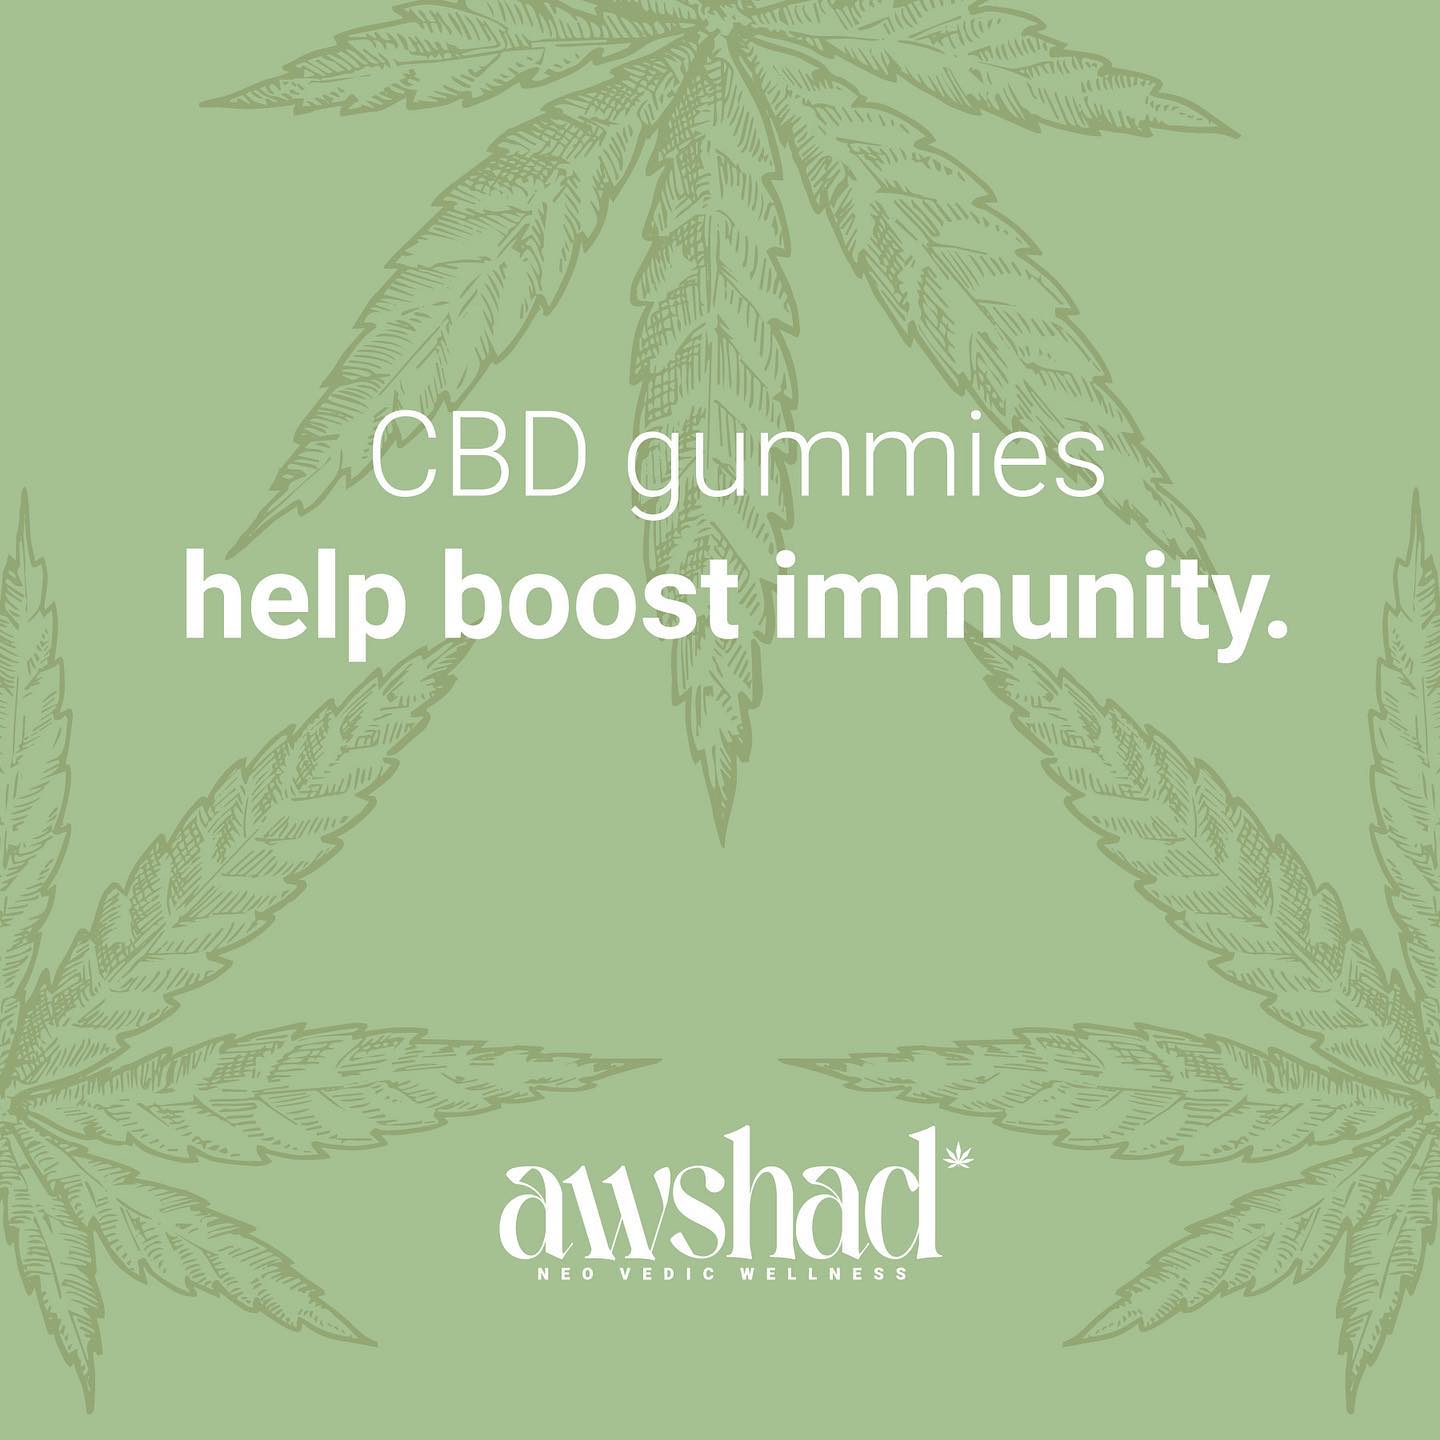 Made from hemp plant, Awshad's CBD gummies can strengthen your immune system in three ways. 

💪🏼They boost natural killer cells.

💪🏼They line the gut to keep it healthy.

💪🏼They maintain a healthy inflammatory response in the respiratory system. 

Get your daily dose of wellness on www.awshad.com

#awshad #allnatural #hempbenefits #gummies  #wellness #sleepaid #cbdgummies #vijayaoil  #hempextract #hempproducts #insomnia #health #healthandwellness #healthy #immunity #heal #natural #naturalremedy #ordernow #care #love  #safe #doctor #ayurveda #healing #newproduct